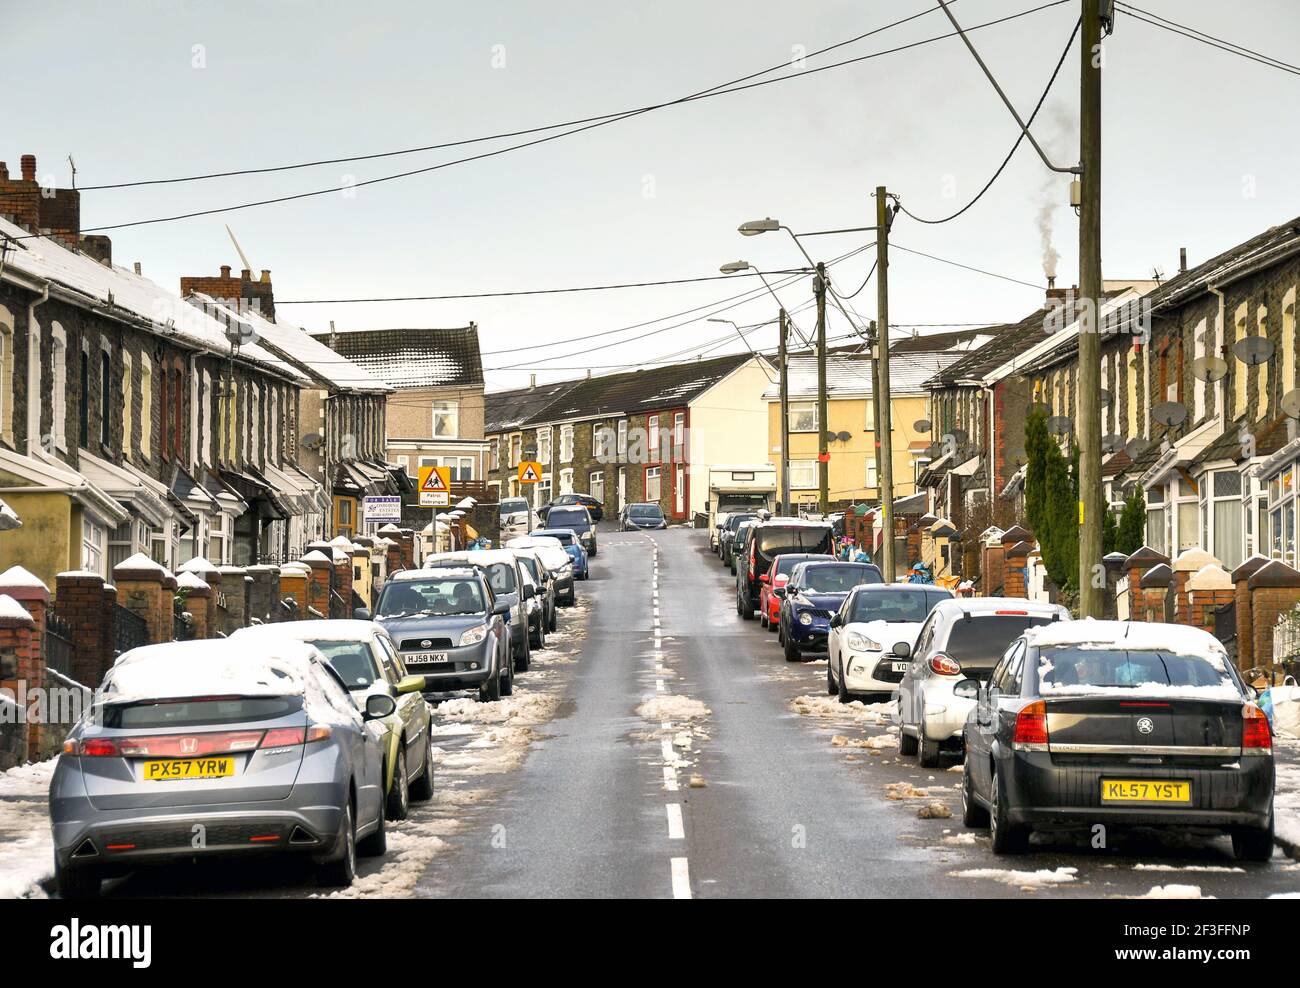 Gilfach Goch, Wales - December 2017: Street view with terraced houses and cars parked outside in a village in one of the South Wales valleys Stock Photo